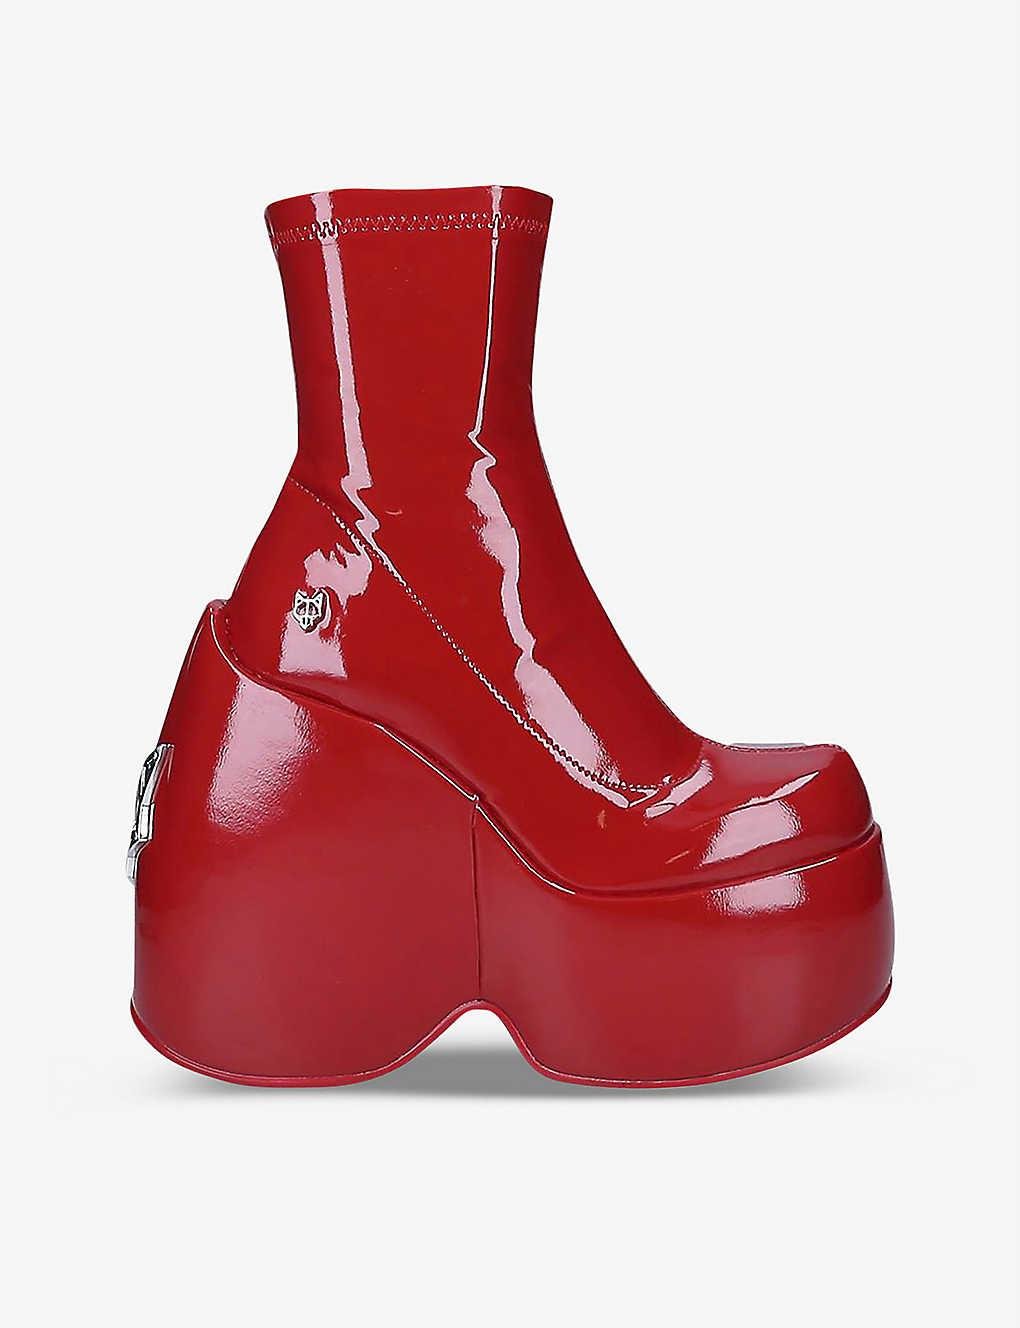 Naked Wolfe Mayhem Faux-leather Platform Ankle Boots in Red | Lyst